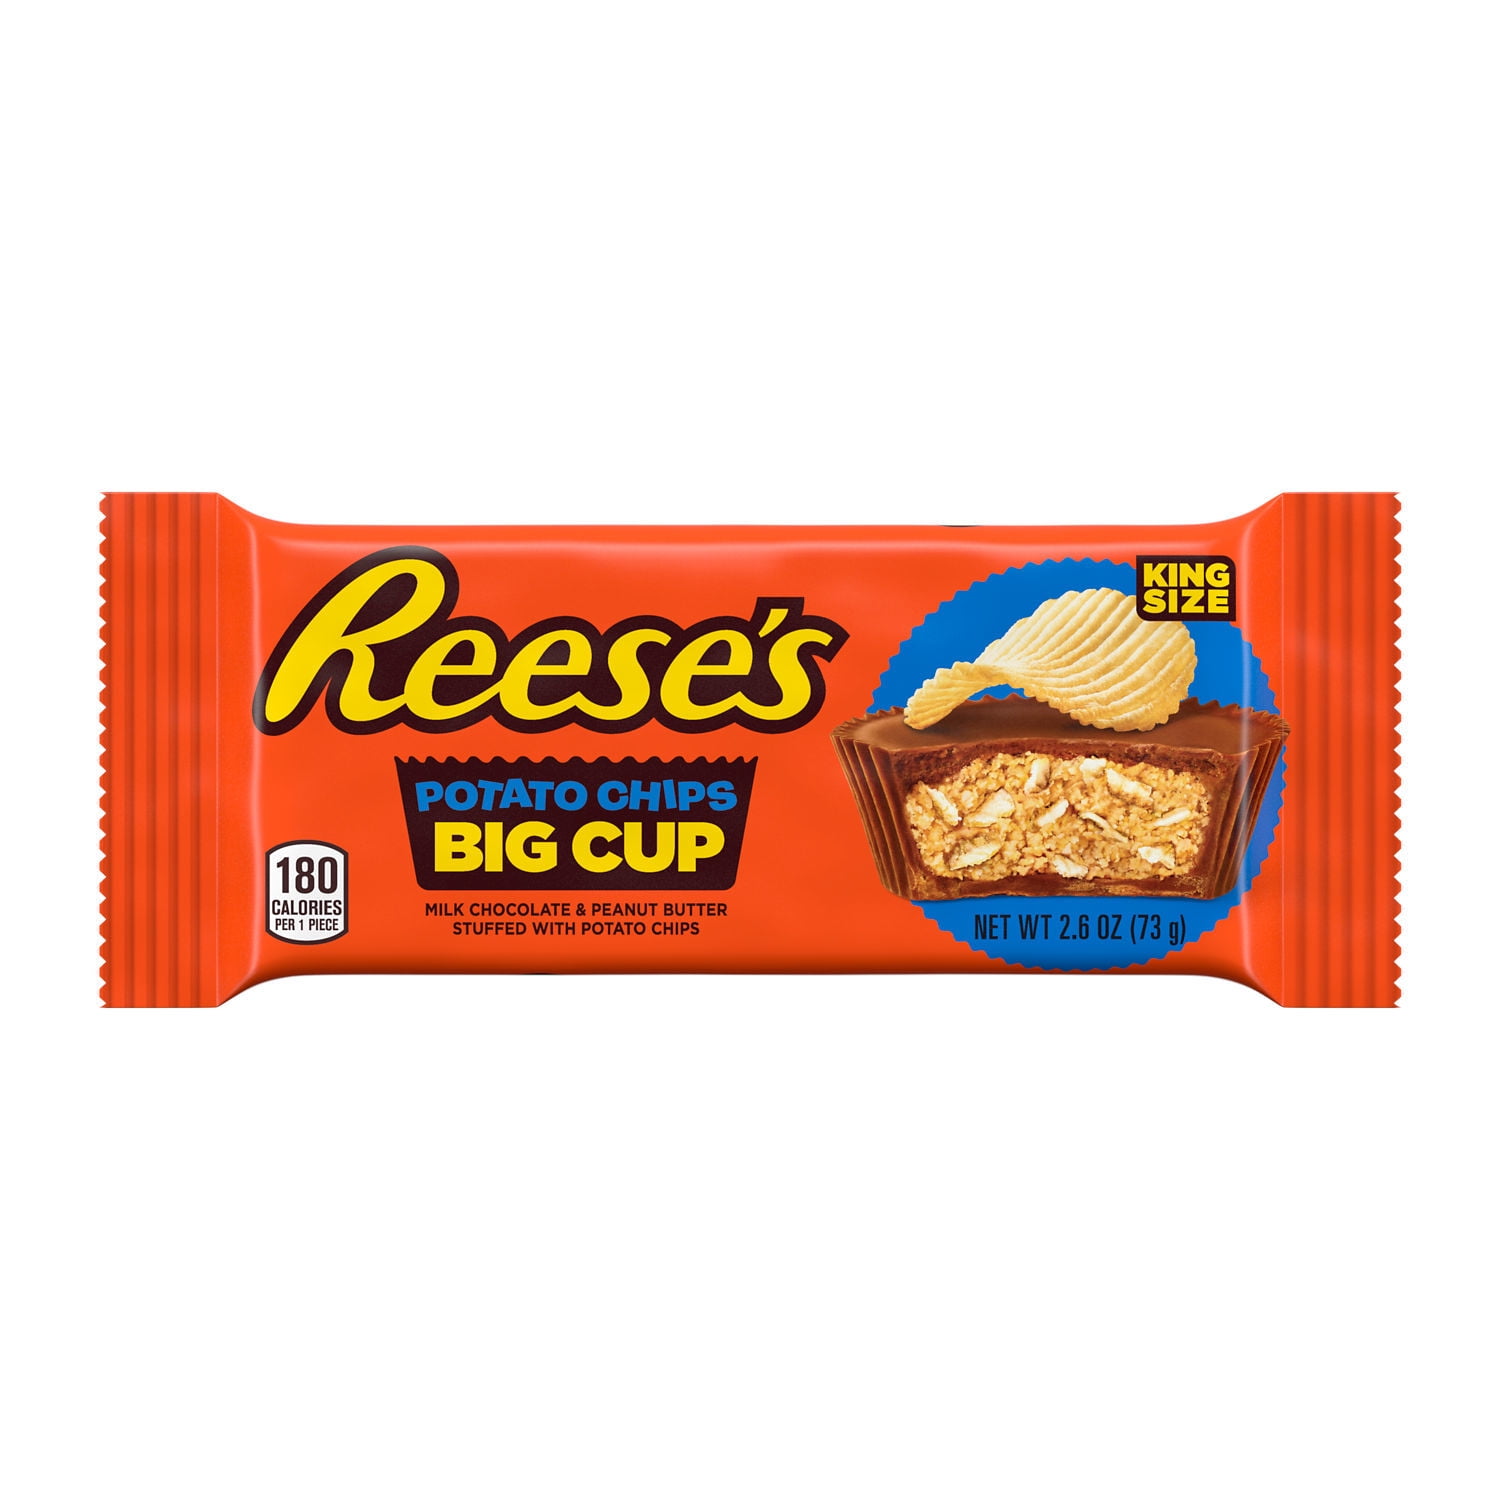 REESE'S, Big Cup Milk Chocolate Peanut Butter with Potato Chips King Size Cups Candy, Gluten Free, 2.6 oz, Pack